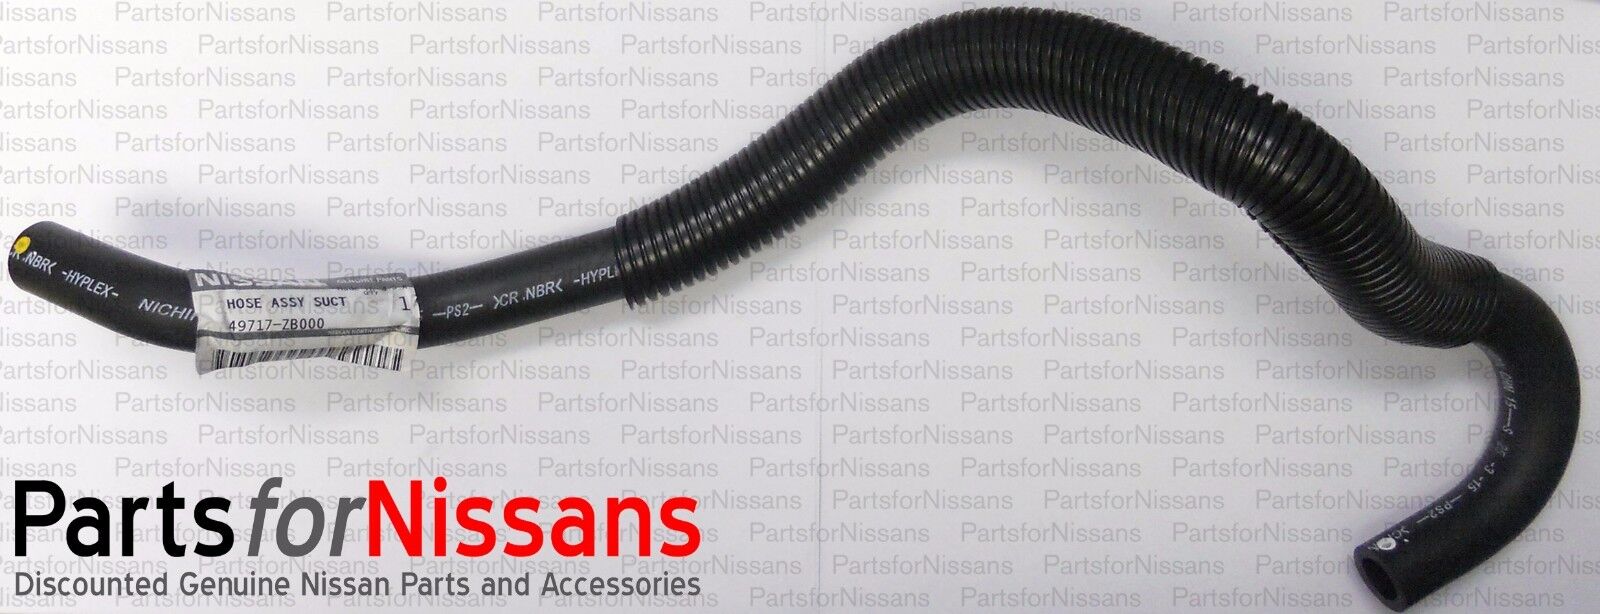 GENUINE NISSAN 2004-2009 ALTIMA MAXIMA QUEST POWER STEERING SUCTION HOSE NEW OEM